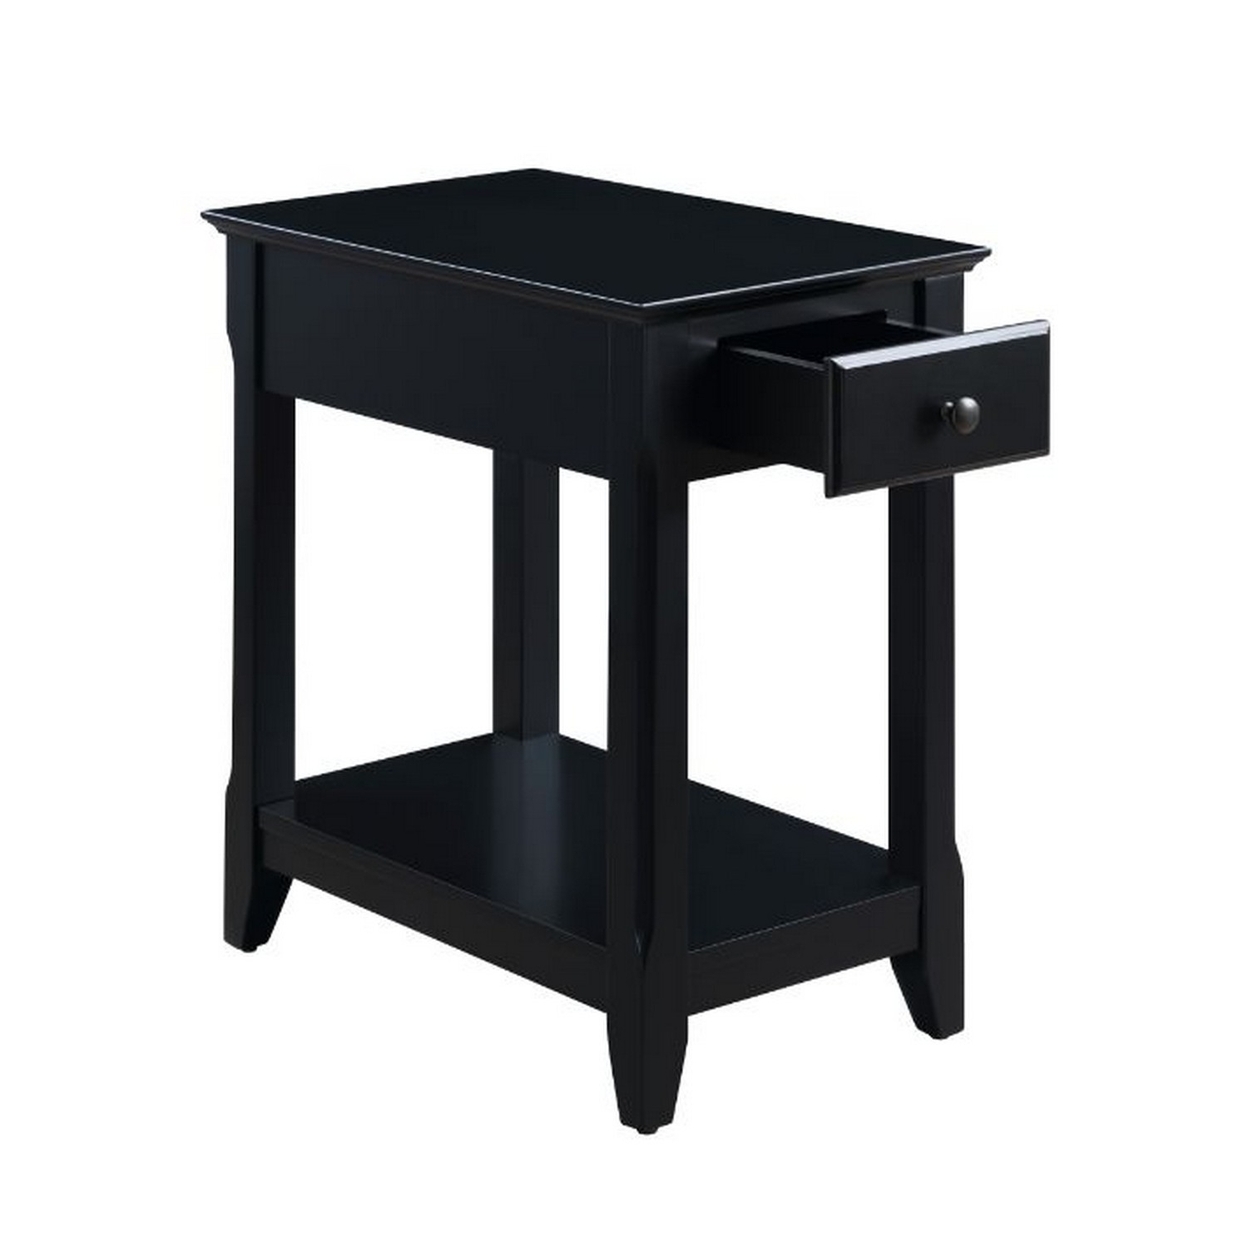 Accent Table With 1 Drawer And Bottom Shelf, Black- Saltoro Sherpi